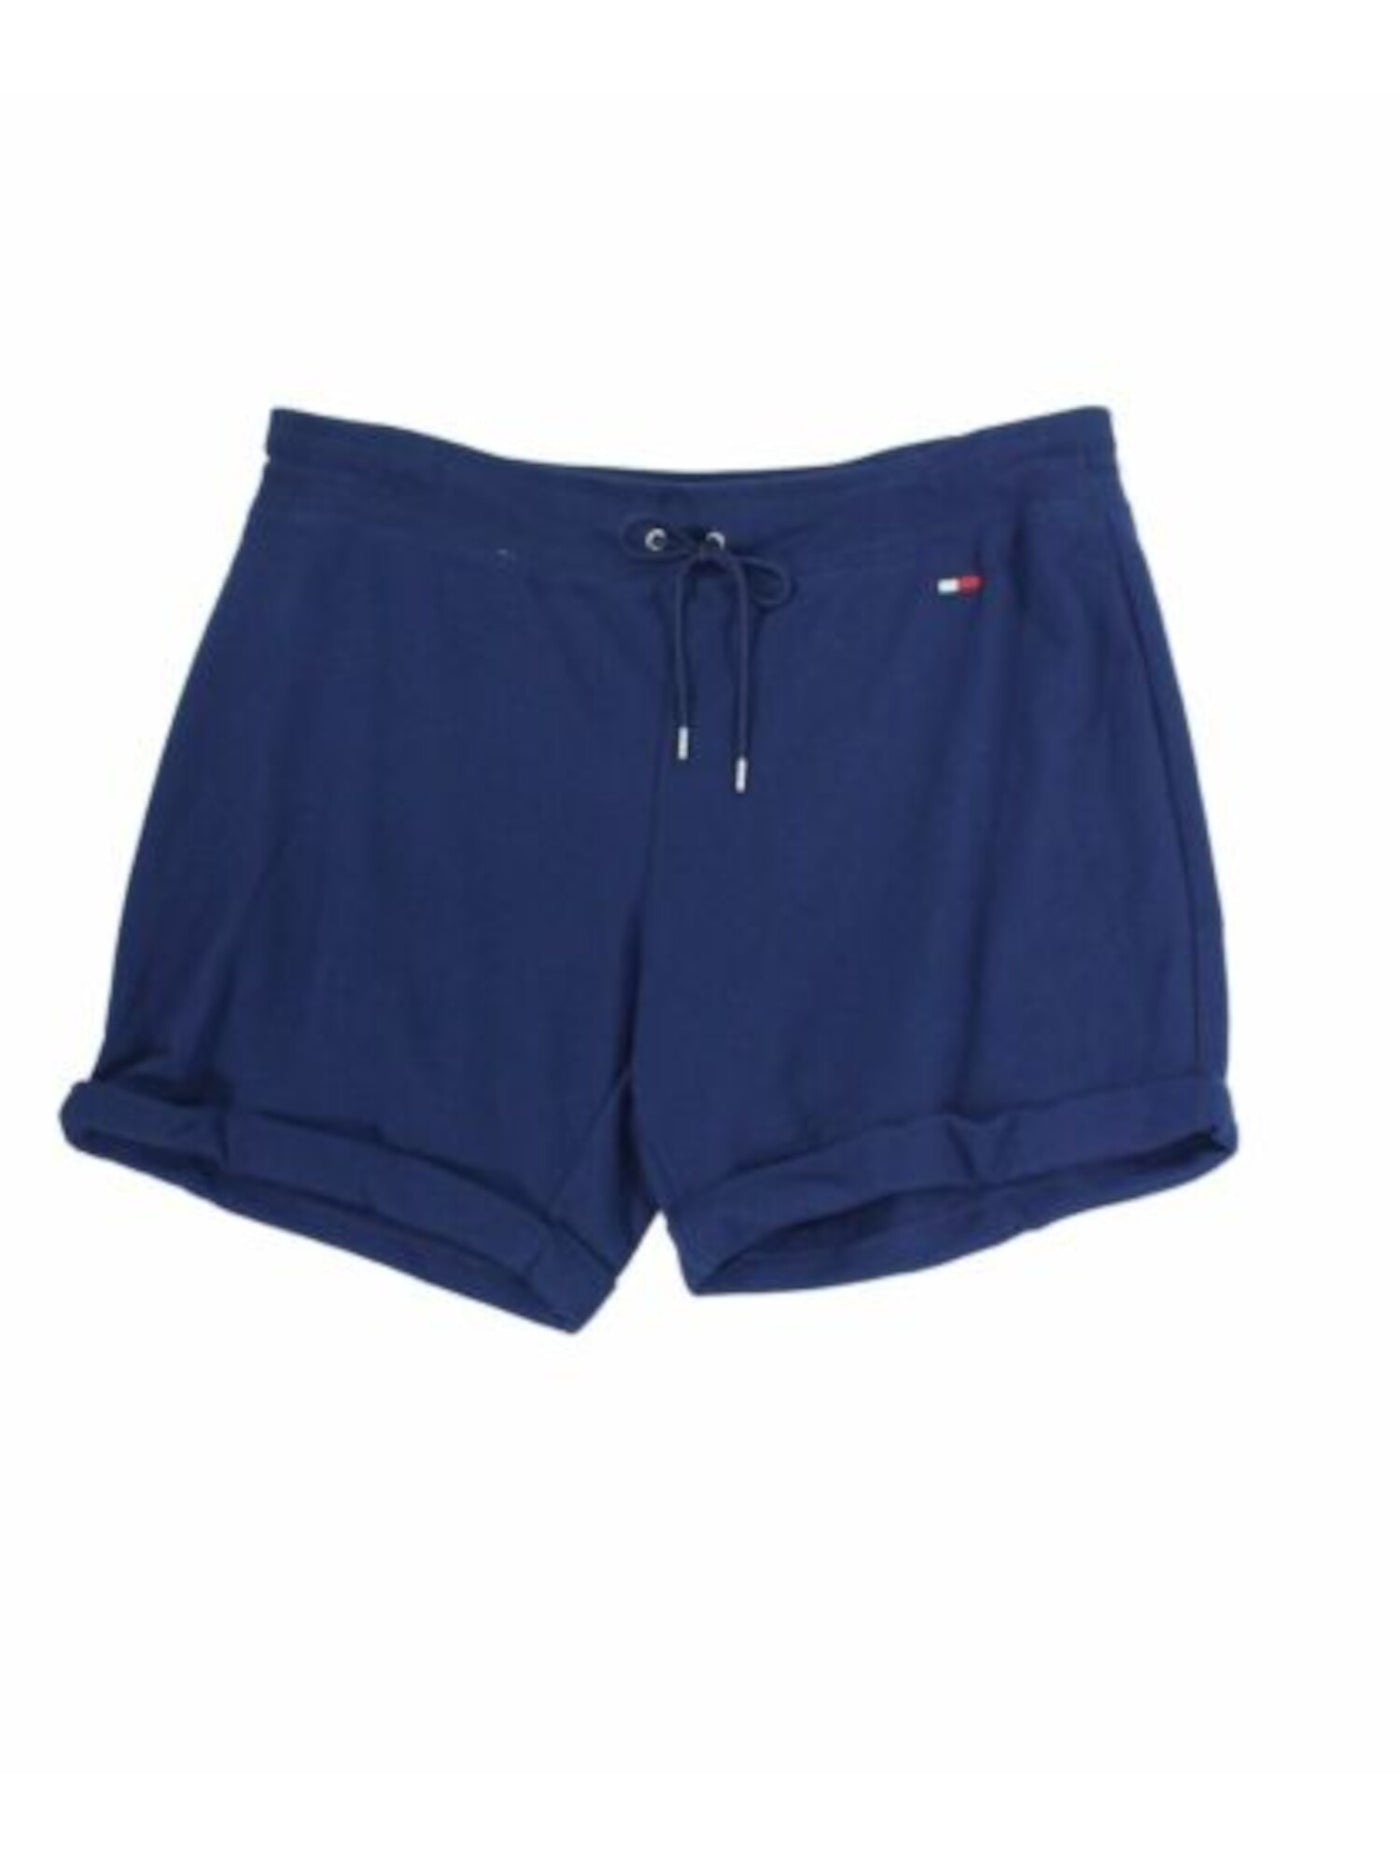 TOMMY HILFIGER Womens Active Wear Cuffed Shorts